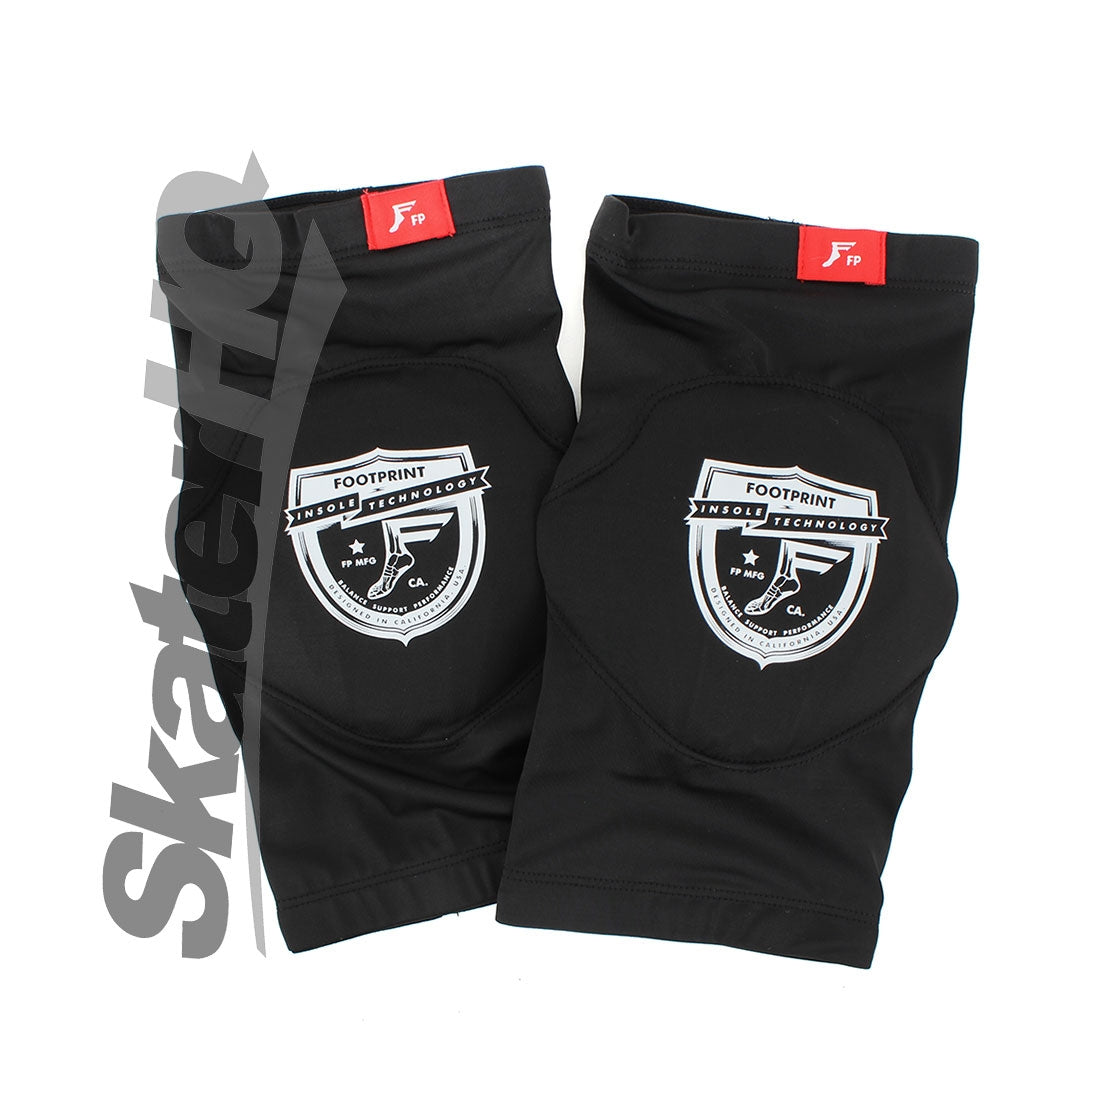 Footprint Lo Pro Protector Knee Sleeves - Large Protective Gear